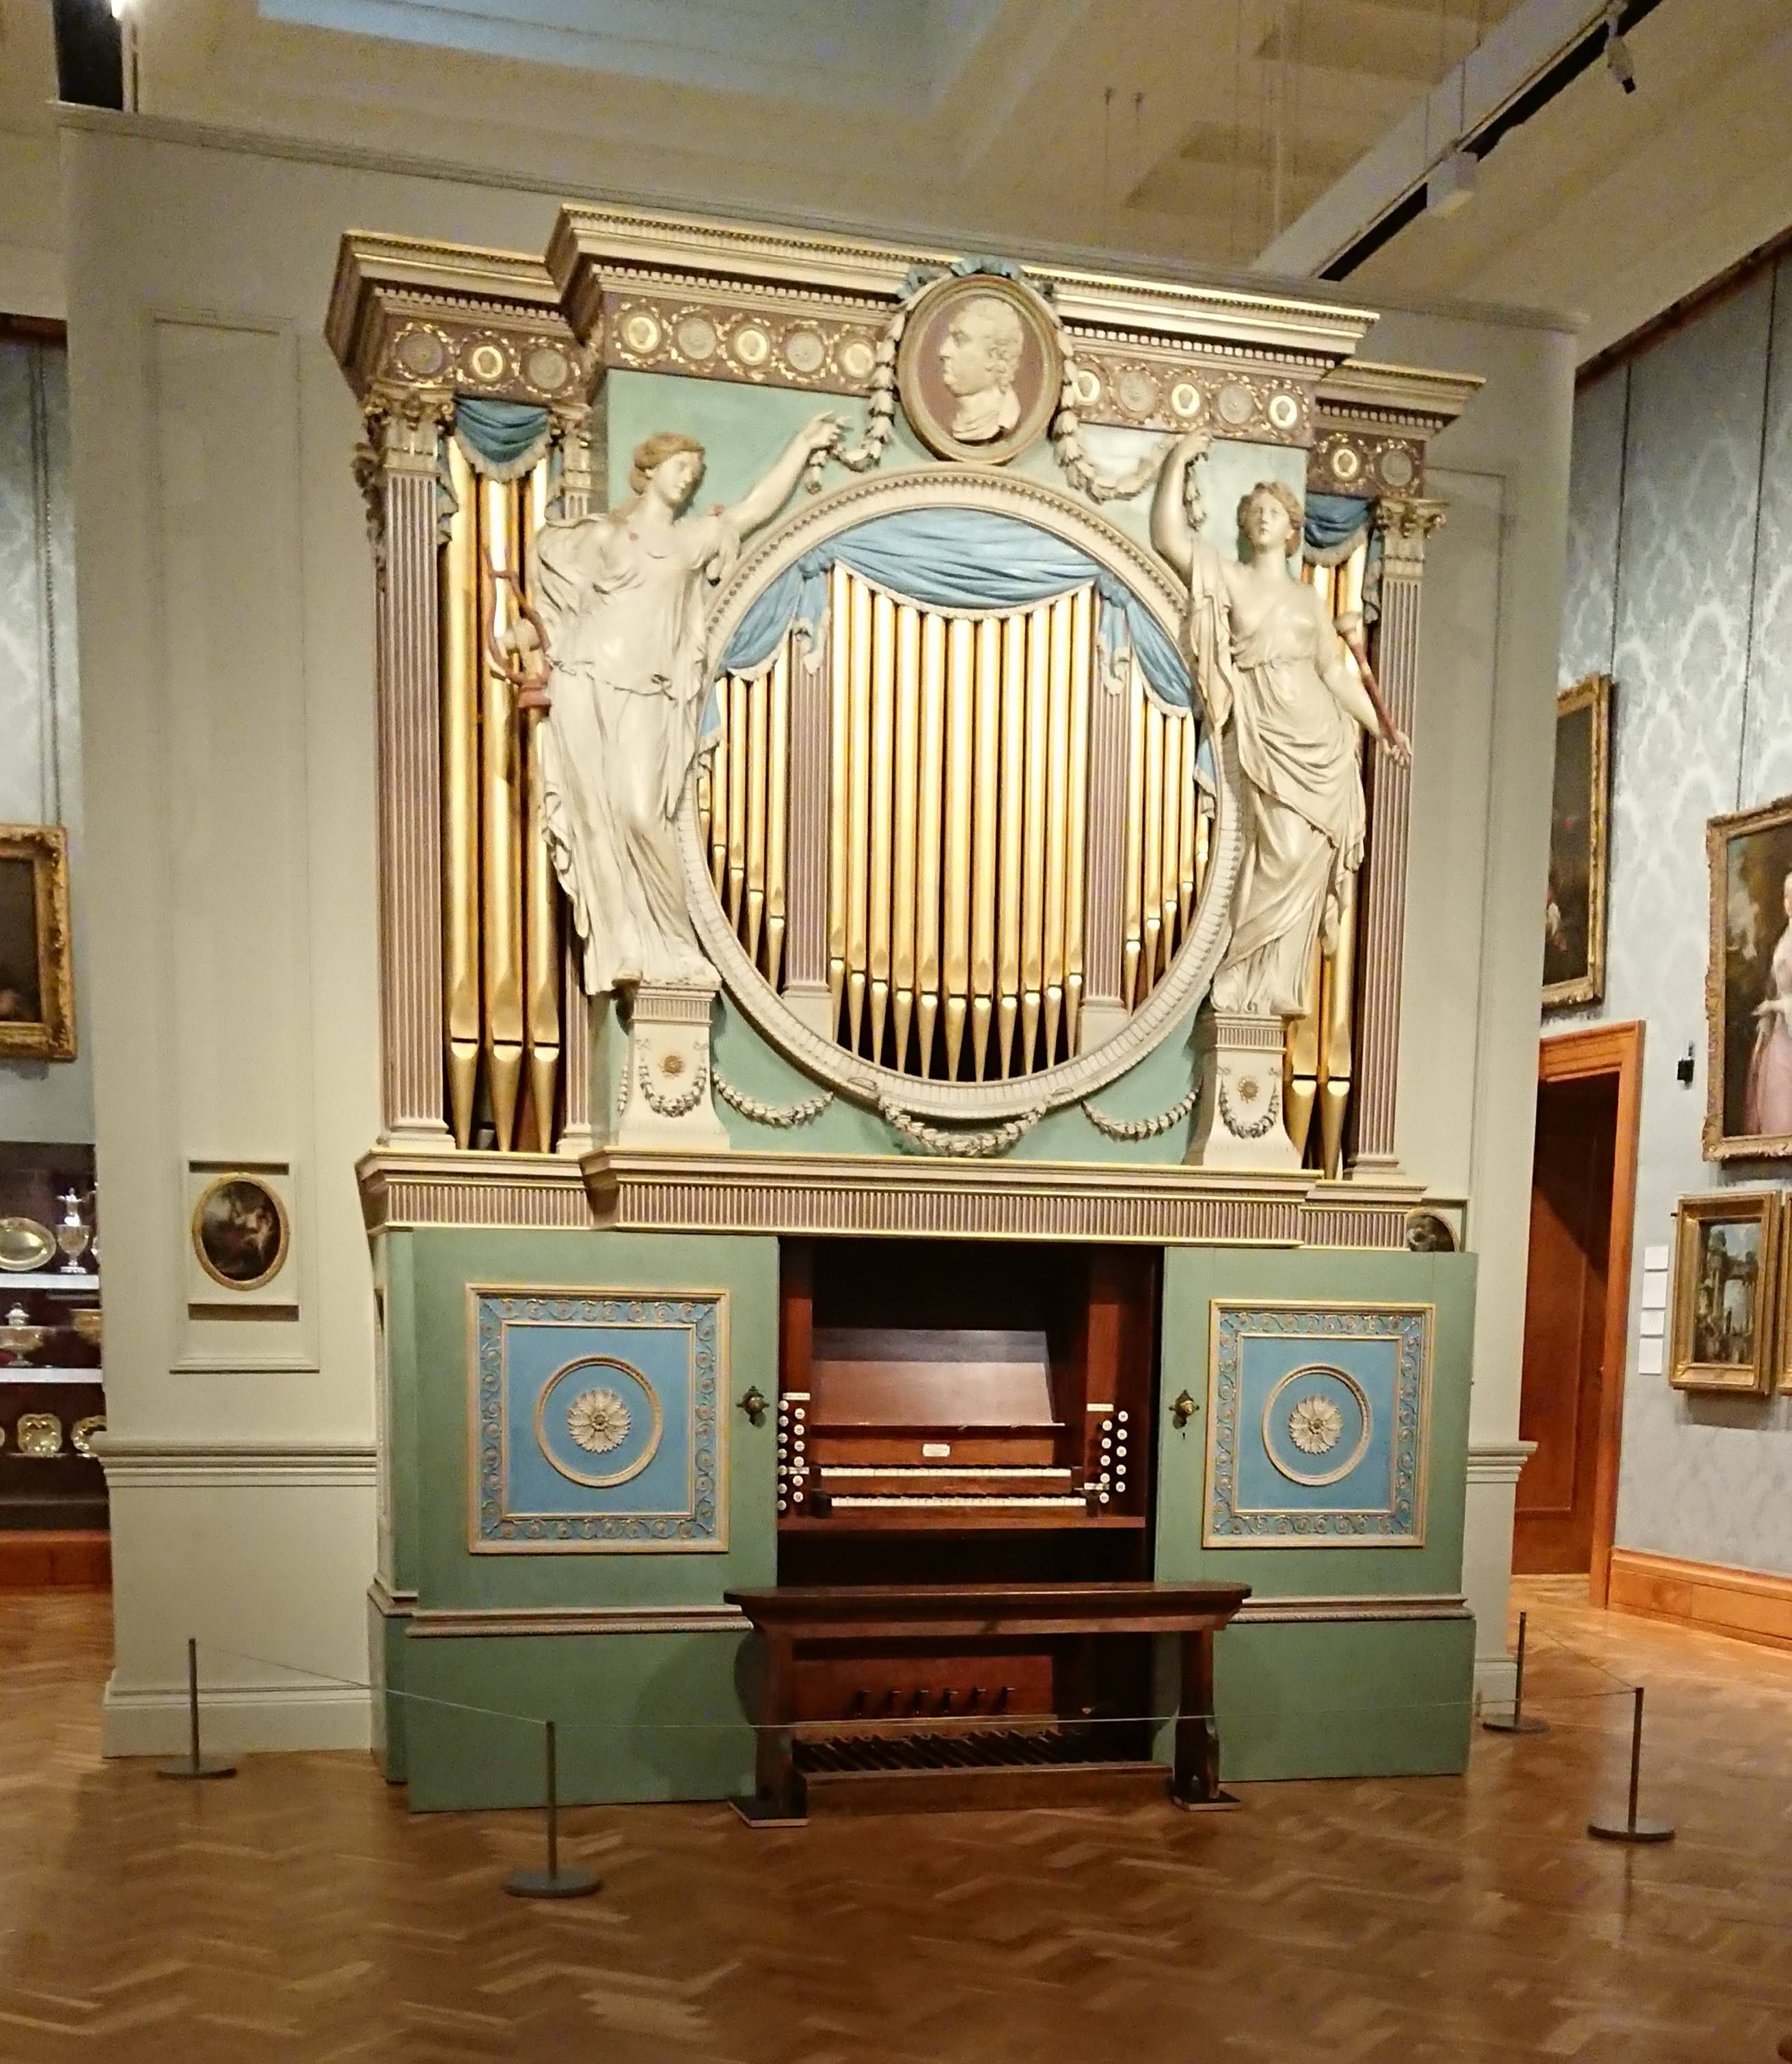 The Williams Wynn pipe organ in the National Museum of Wales